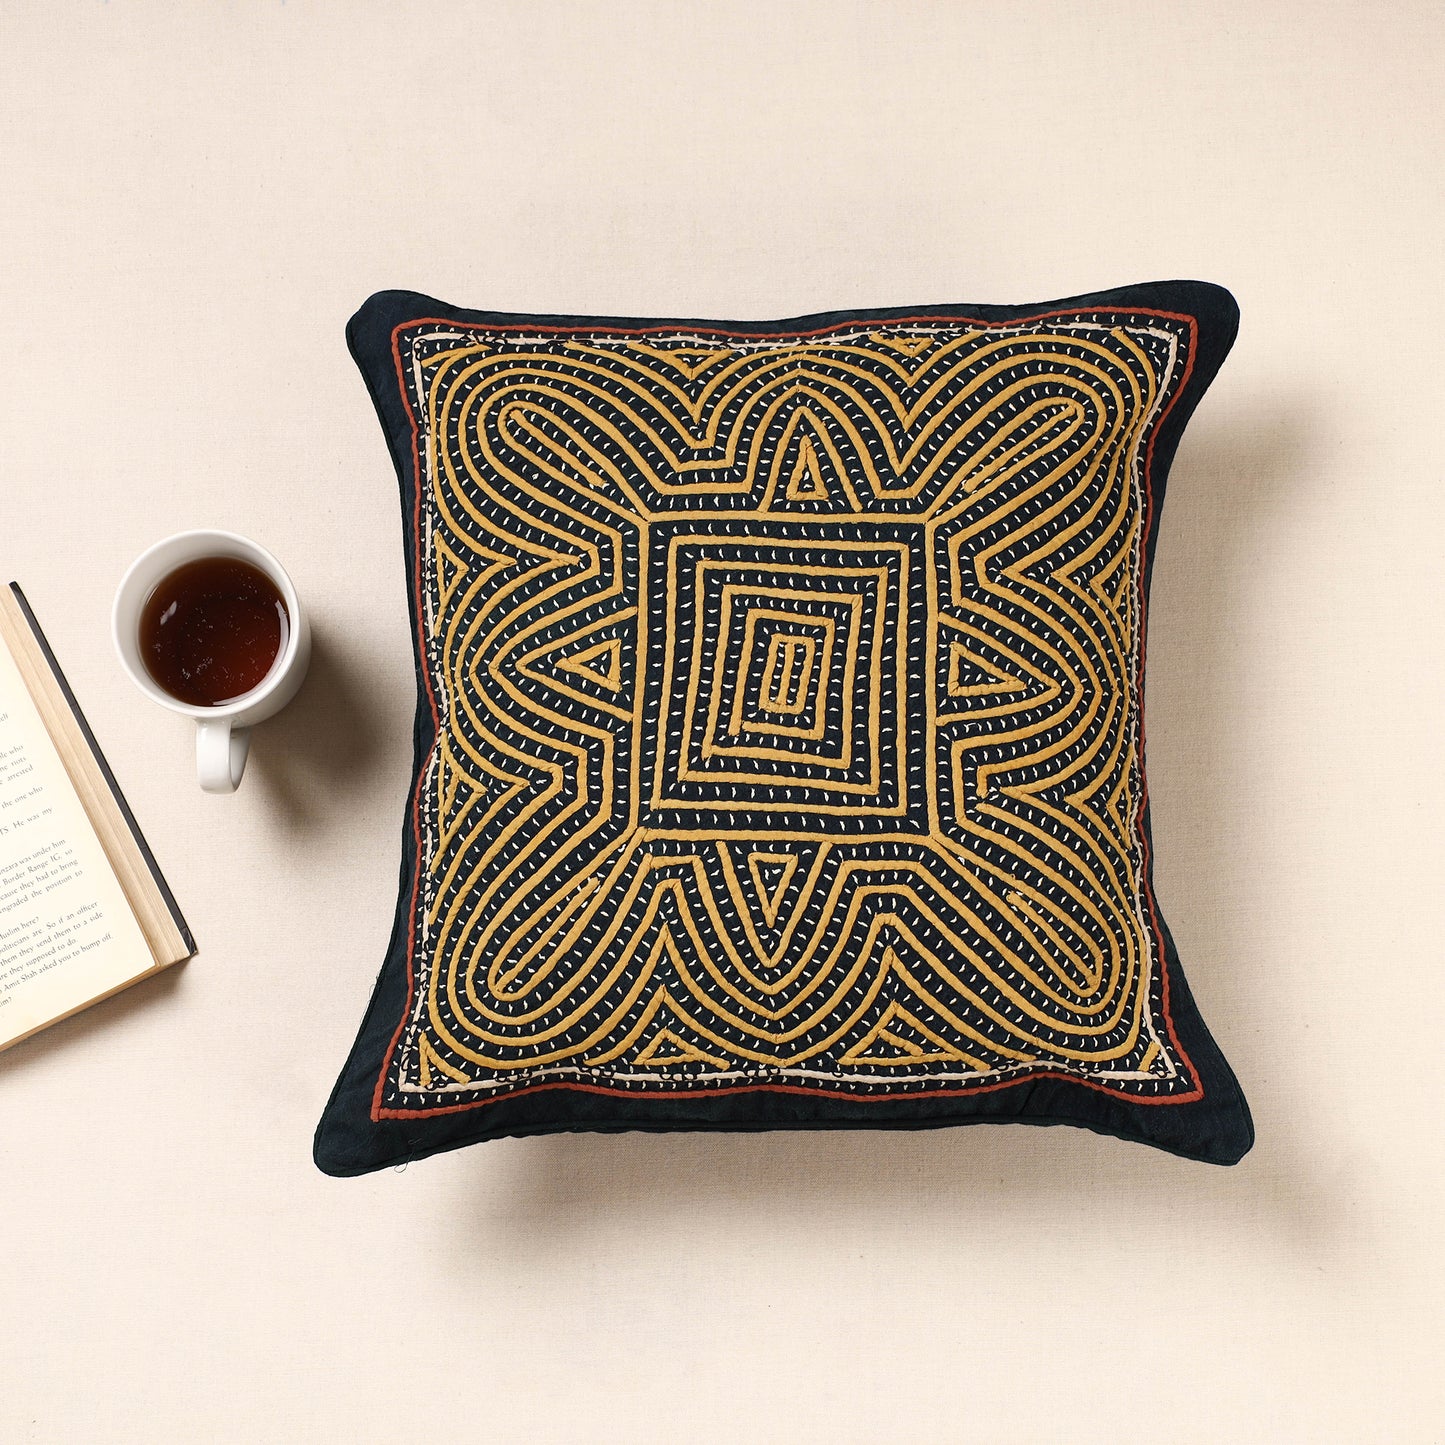 Hand Embroidery Cushion Cover